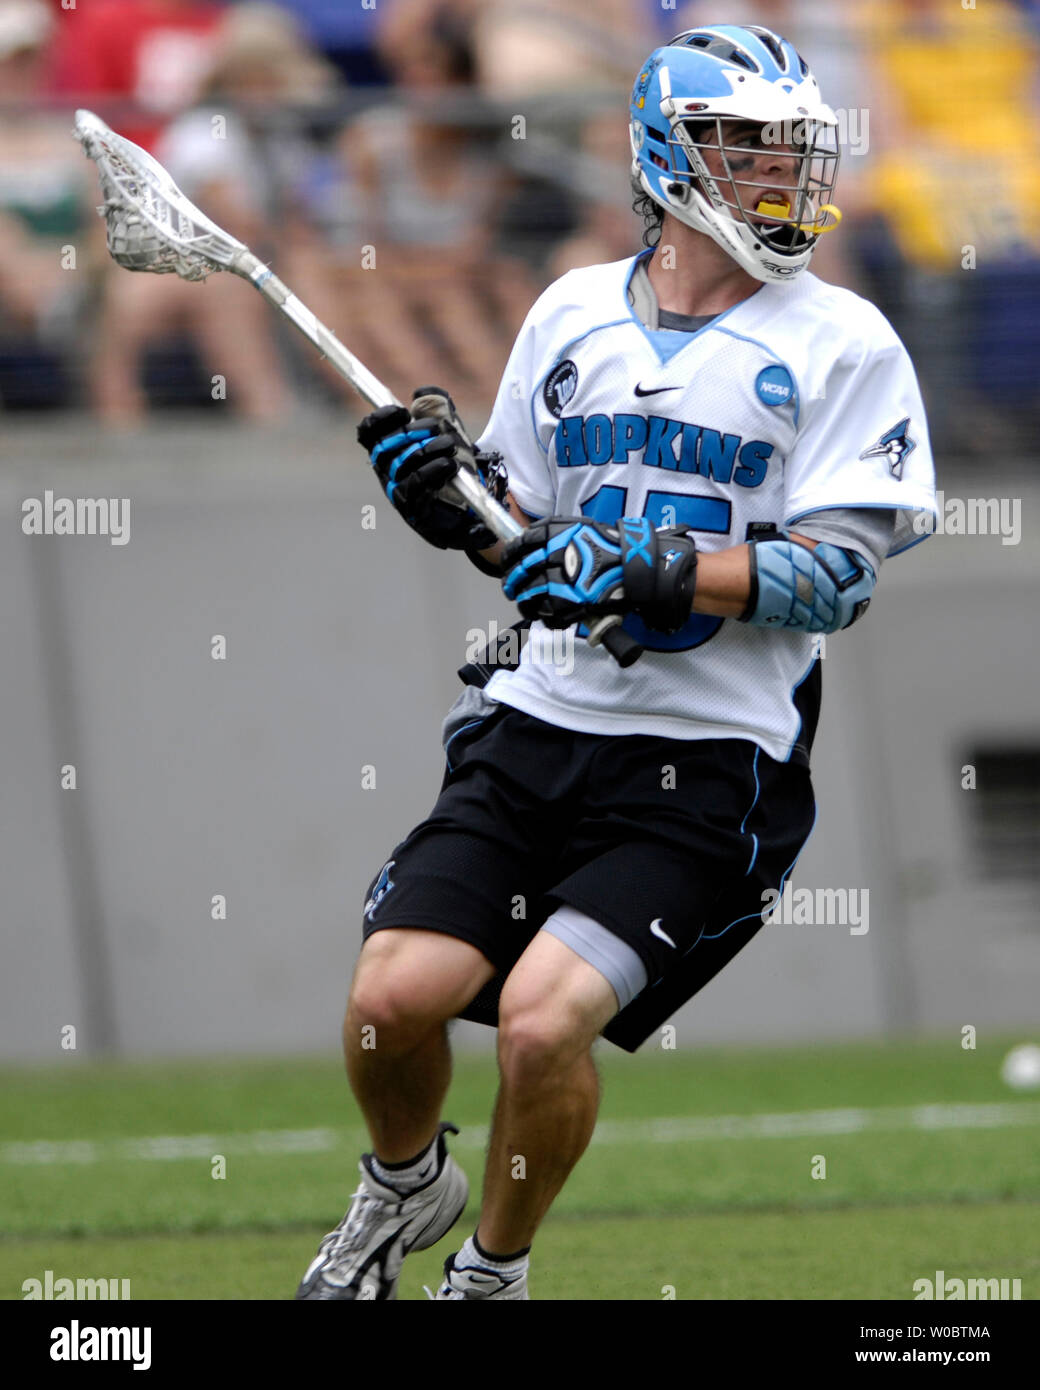 Johns Hopkins University Blue Jays Michael Kimmel (15) scores his second goal of the game in the fourth quarter against the Delaware Blue Hens in the semi-final of the NCAA Division I lacrosse championship at M&T Bank Stadium in Baltimore, Maryland on May 26, 2007.   Johns Hopkins defeated Delaware 8-3 to move to the lacrosse championship.   (UPI Photo/ Mark Goldman) Stock Photo